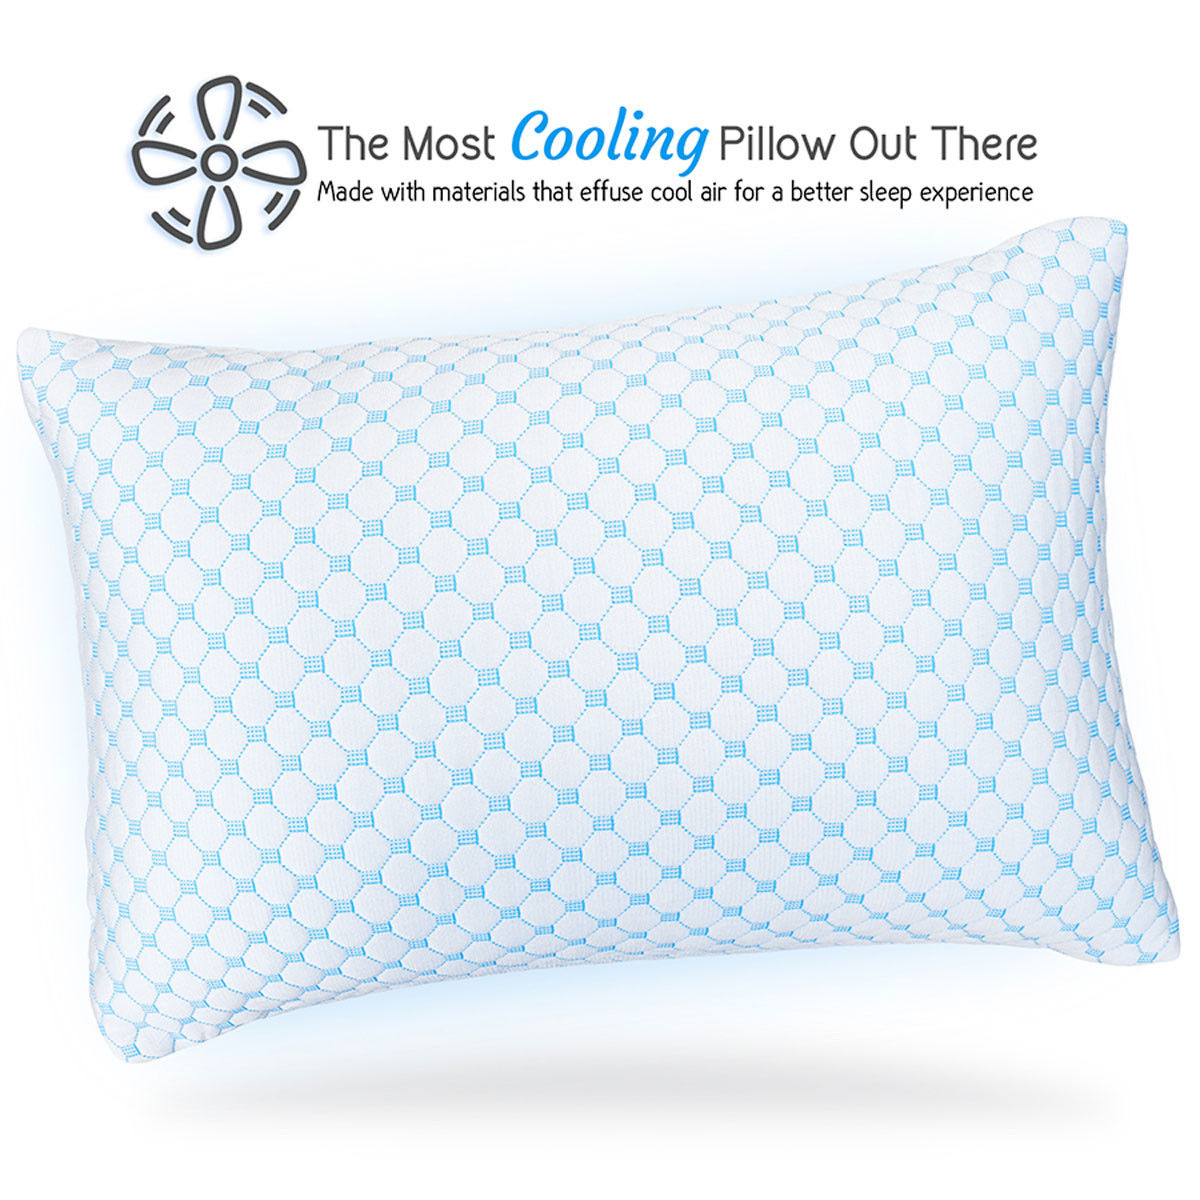 What makes the Clara Clark Reversible Cooling pillow keep you cool?